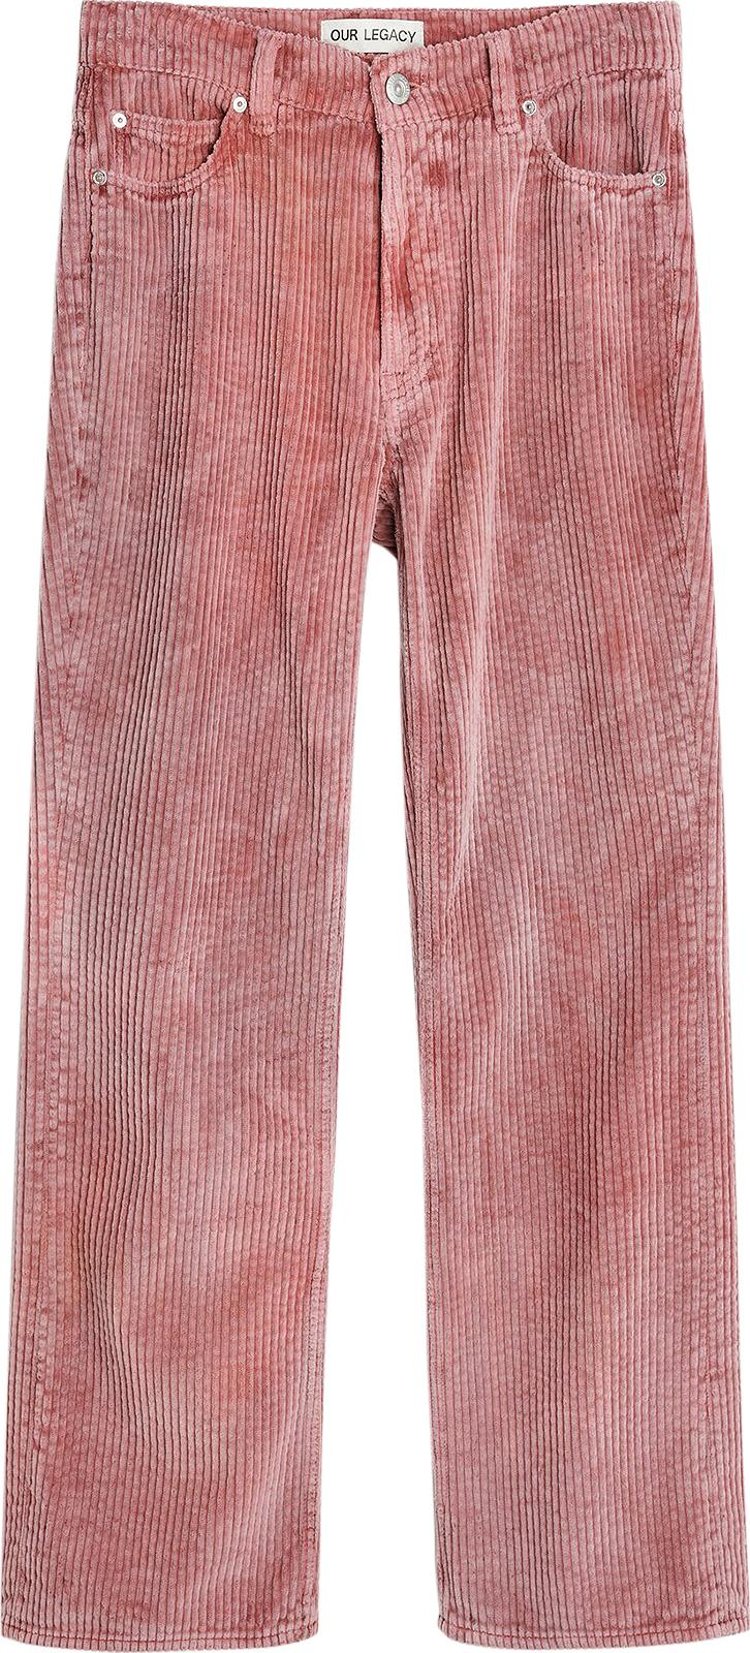 Our Legacy 70s Cut Pants 'Pink'